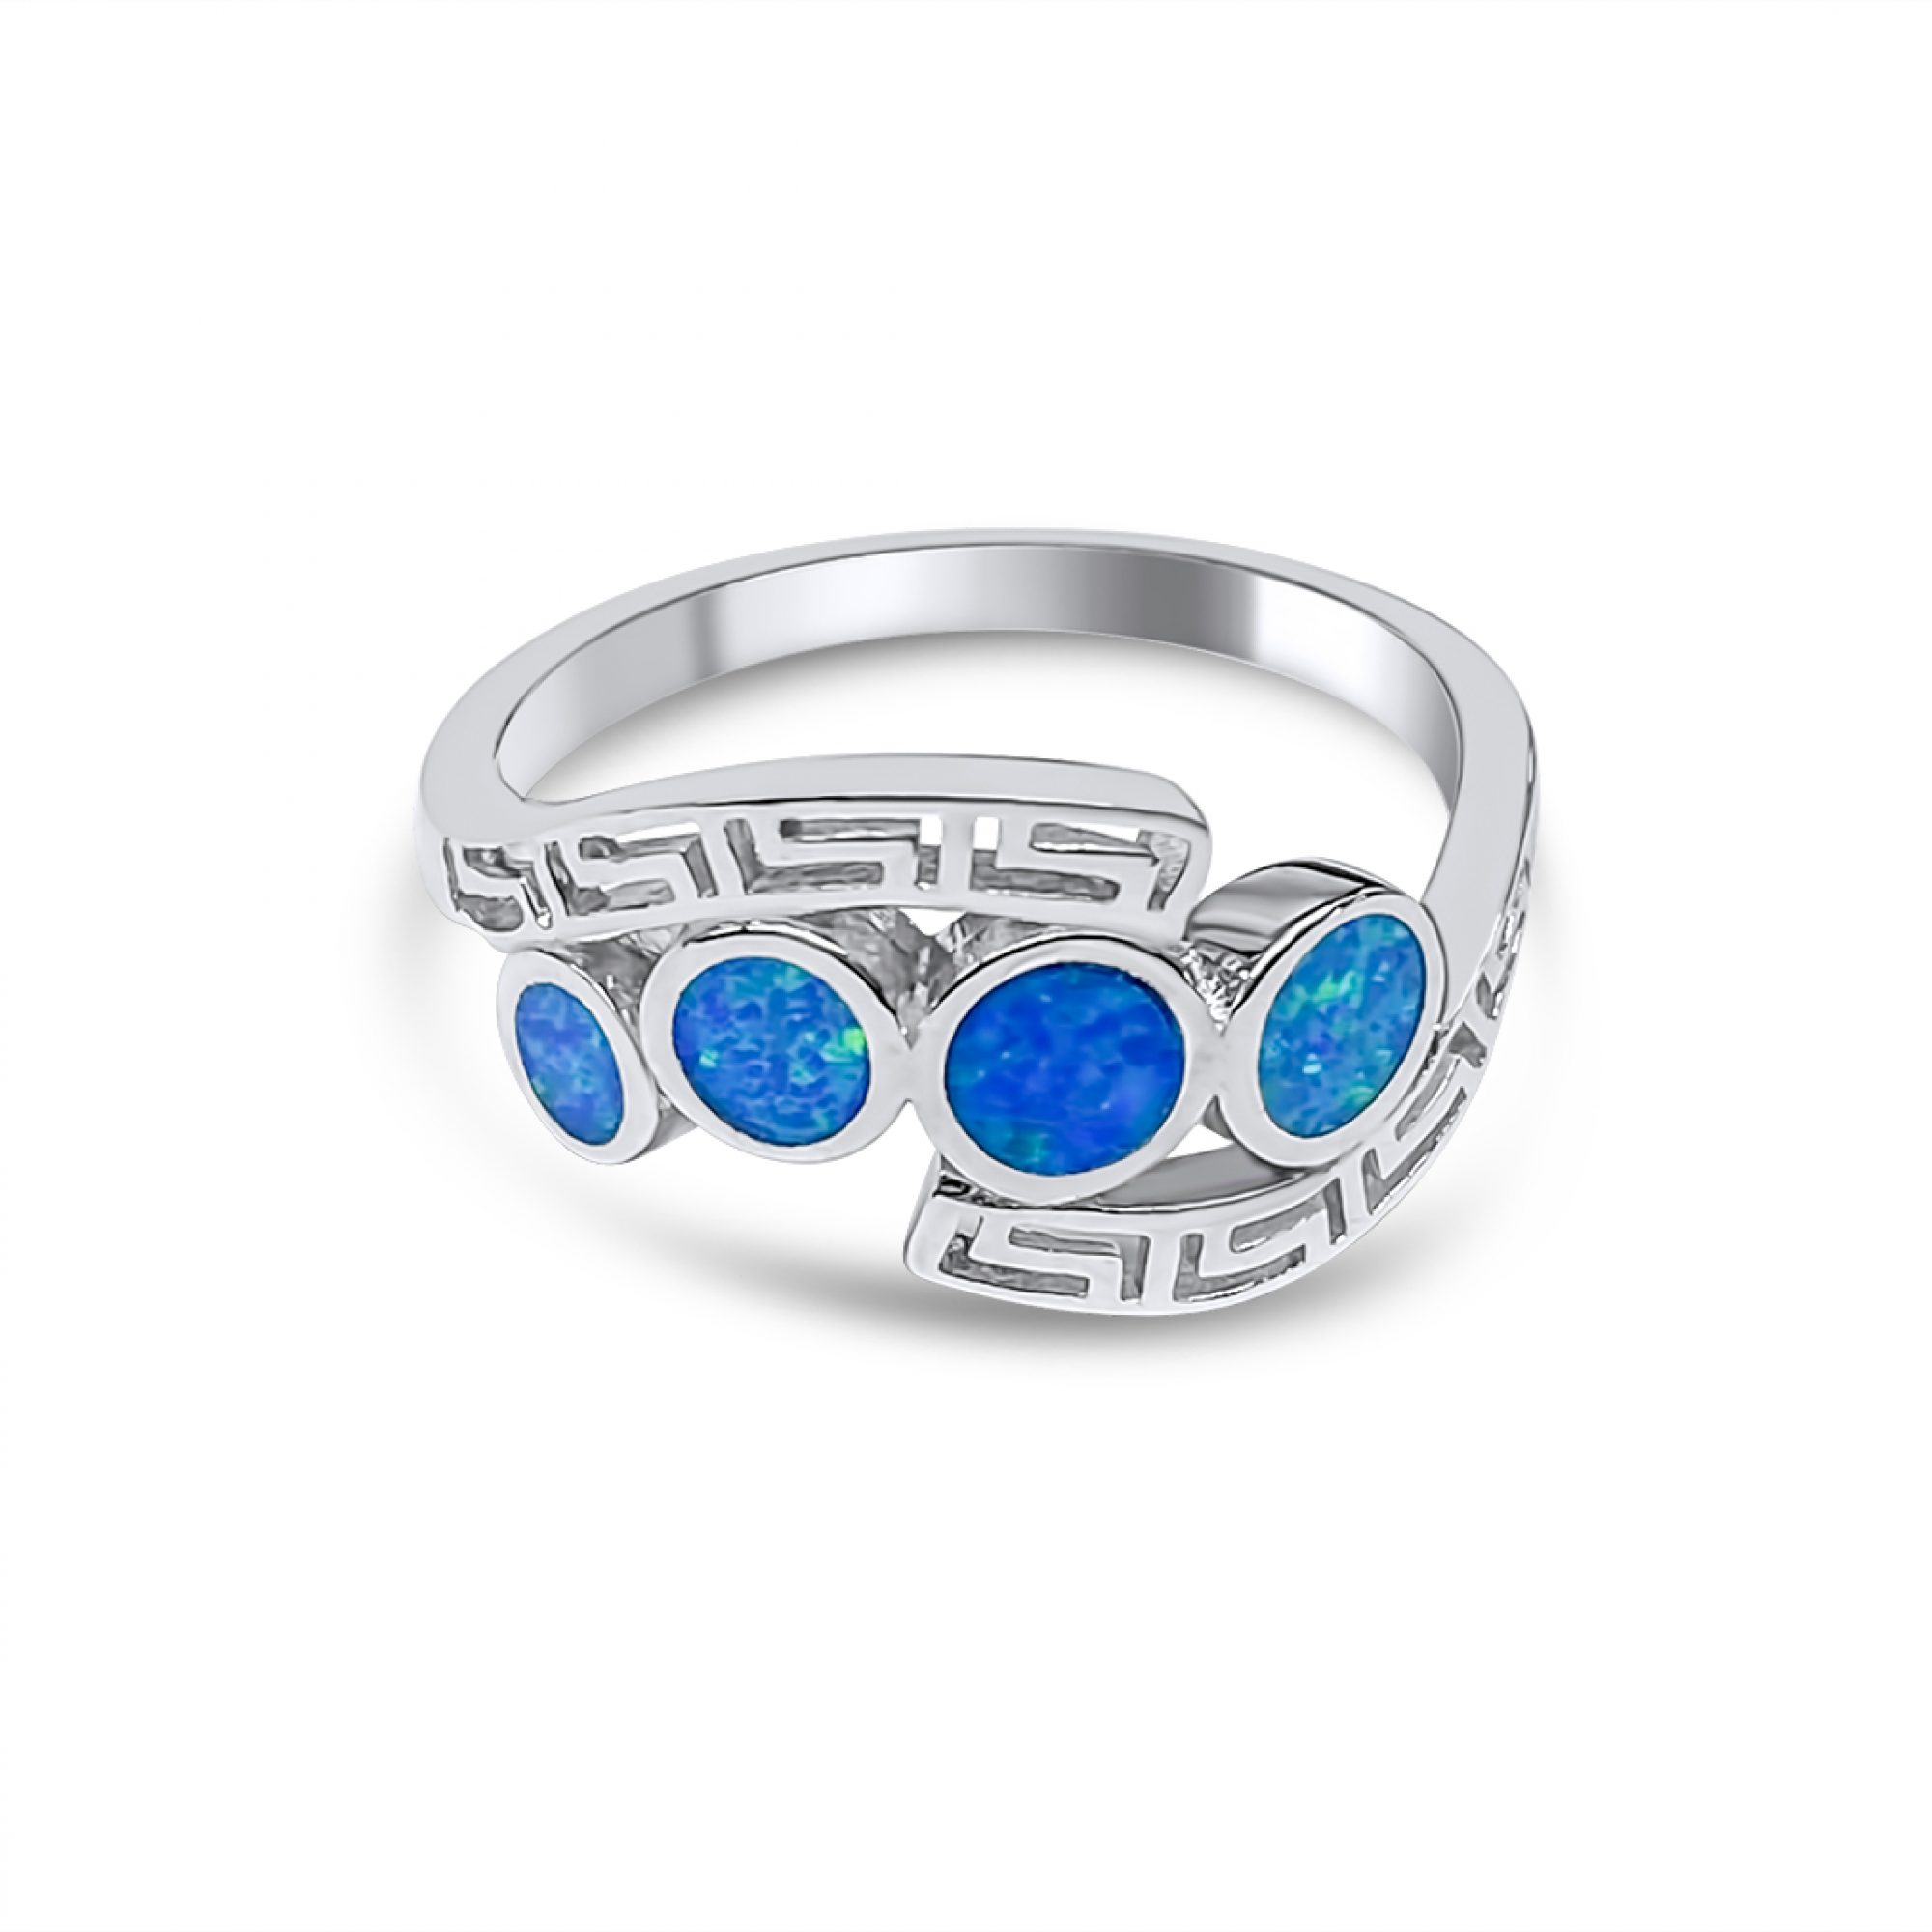 Silver ring with opal stones and meander